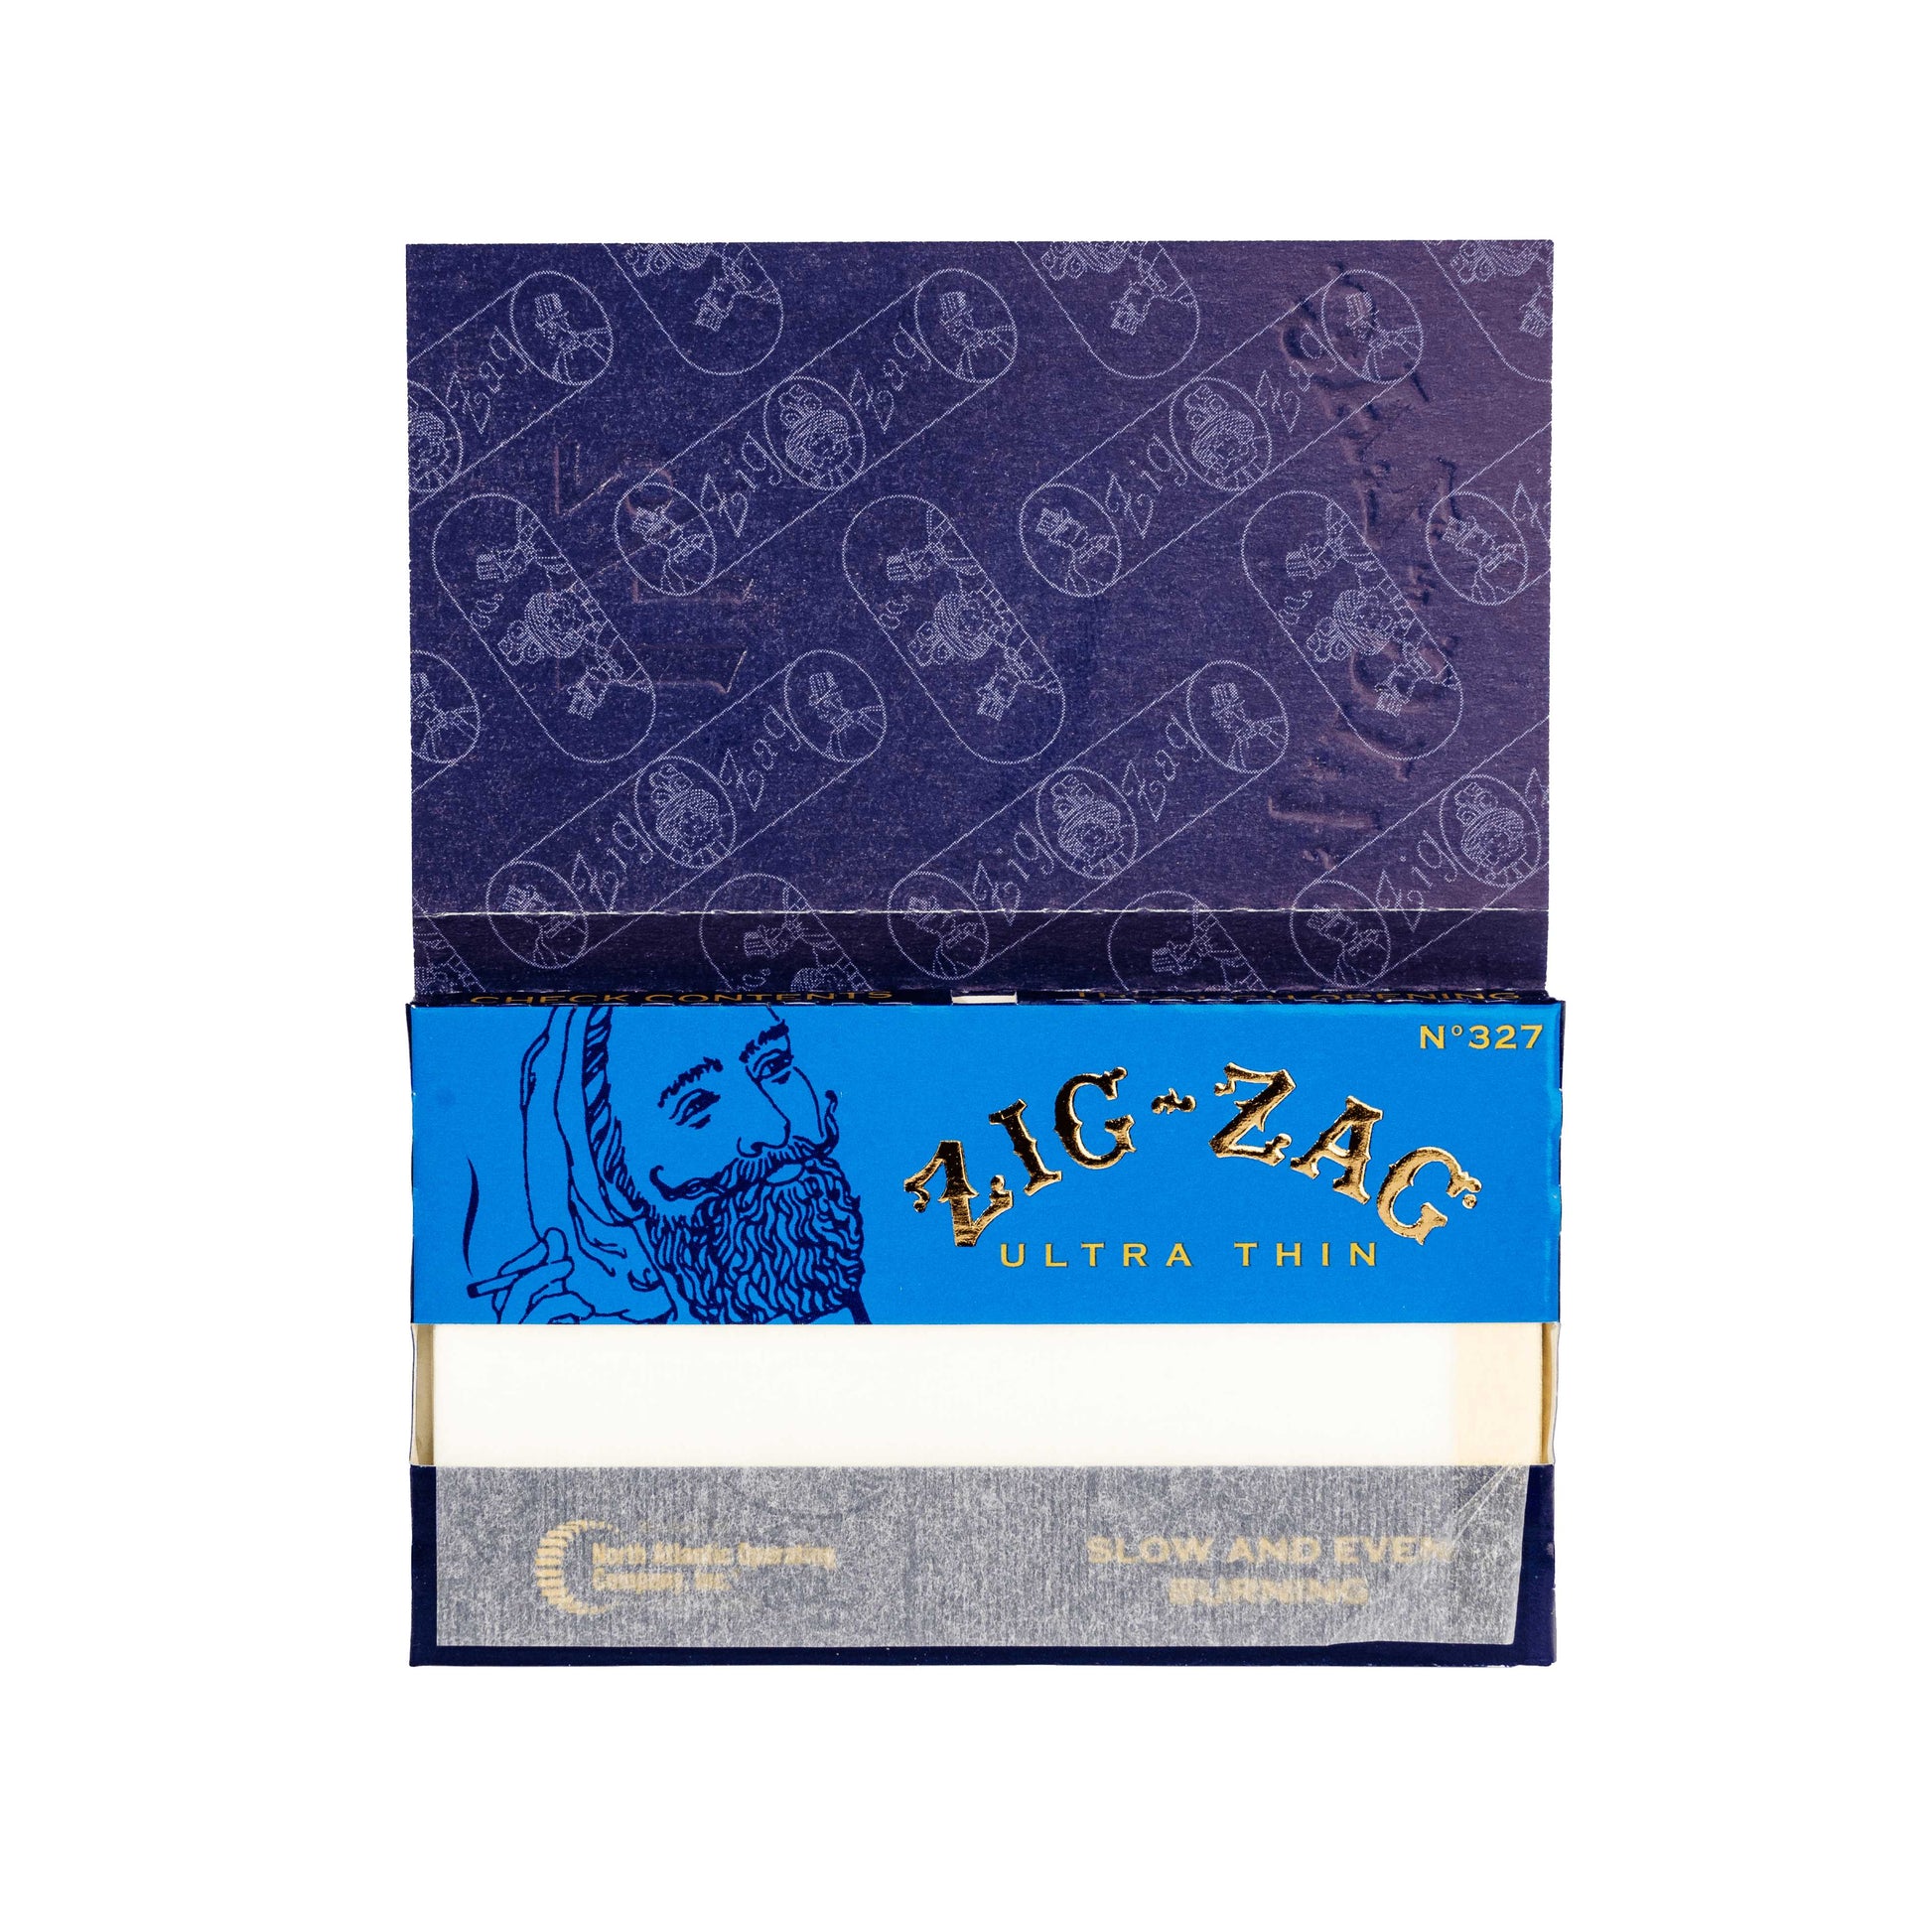 Zig-Zag Rolling Papers - 1/2 Ultra Thin - - Rolling Papers - Zig-Zag - Cali Tobacconist